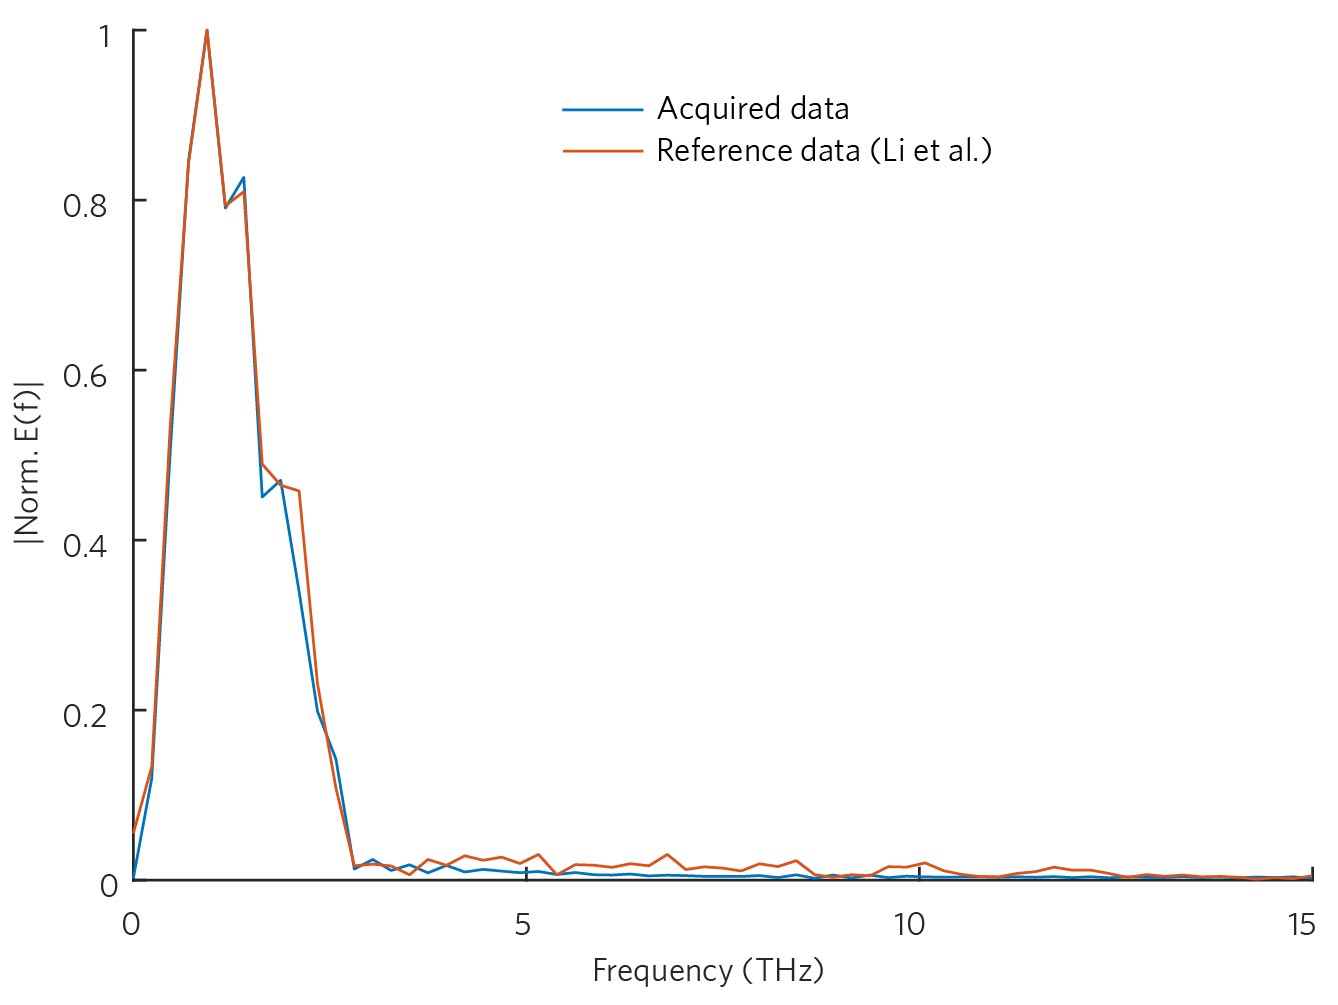 Figure 10 | Frequency-domain data (FFT) of terahertz emission from Co/Pt thin film bilayer, acquired data vs reference data (Li et al, figure 3b).[28]